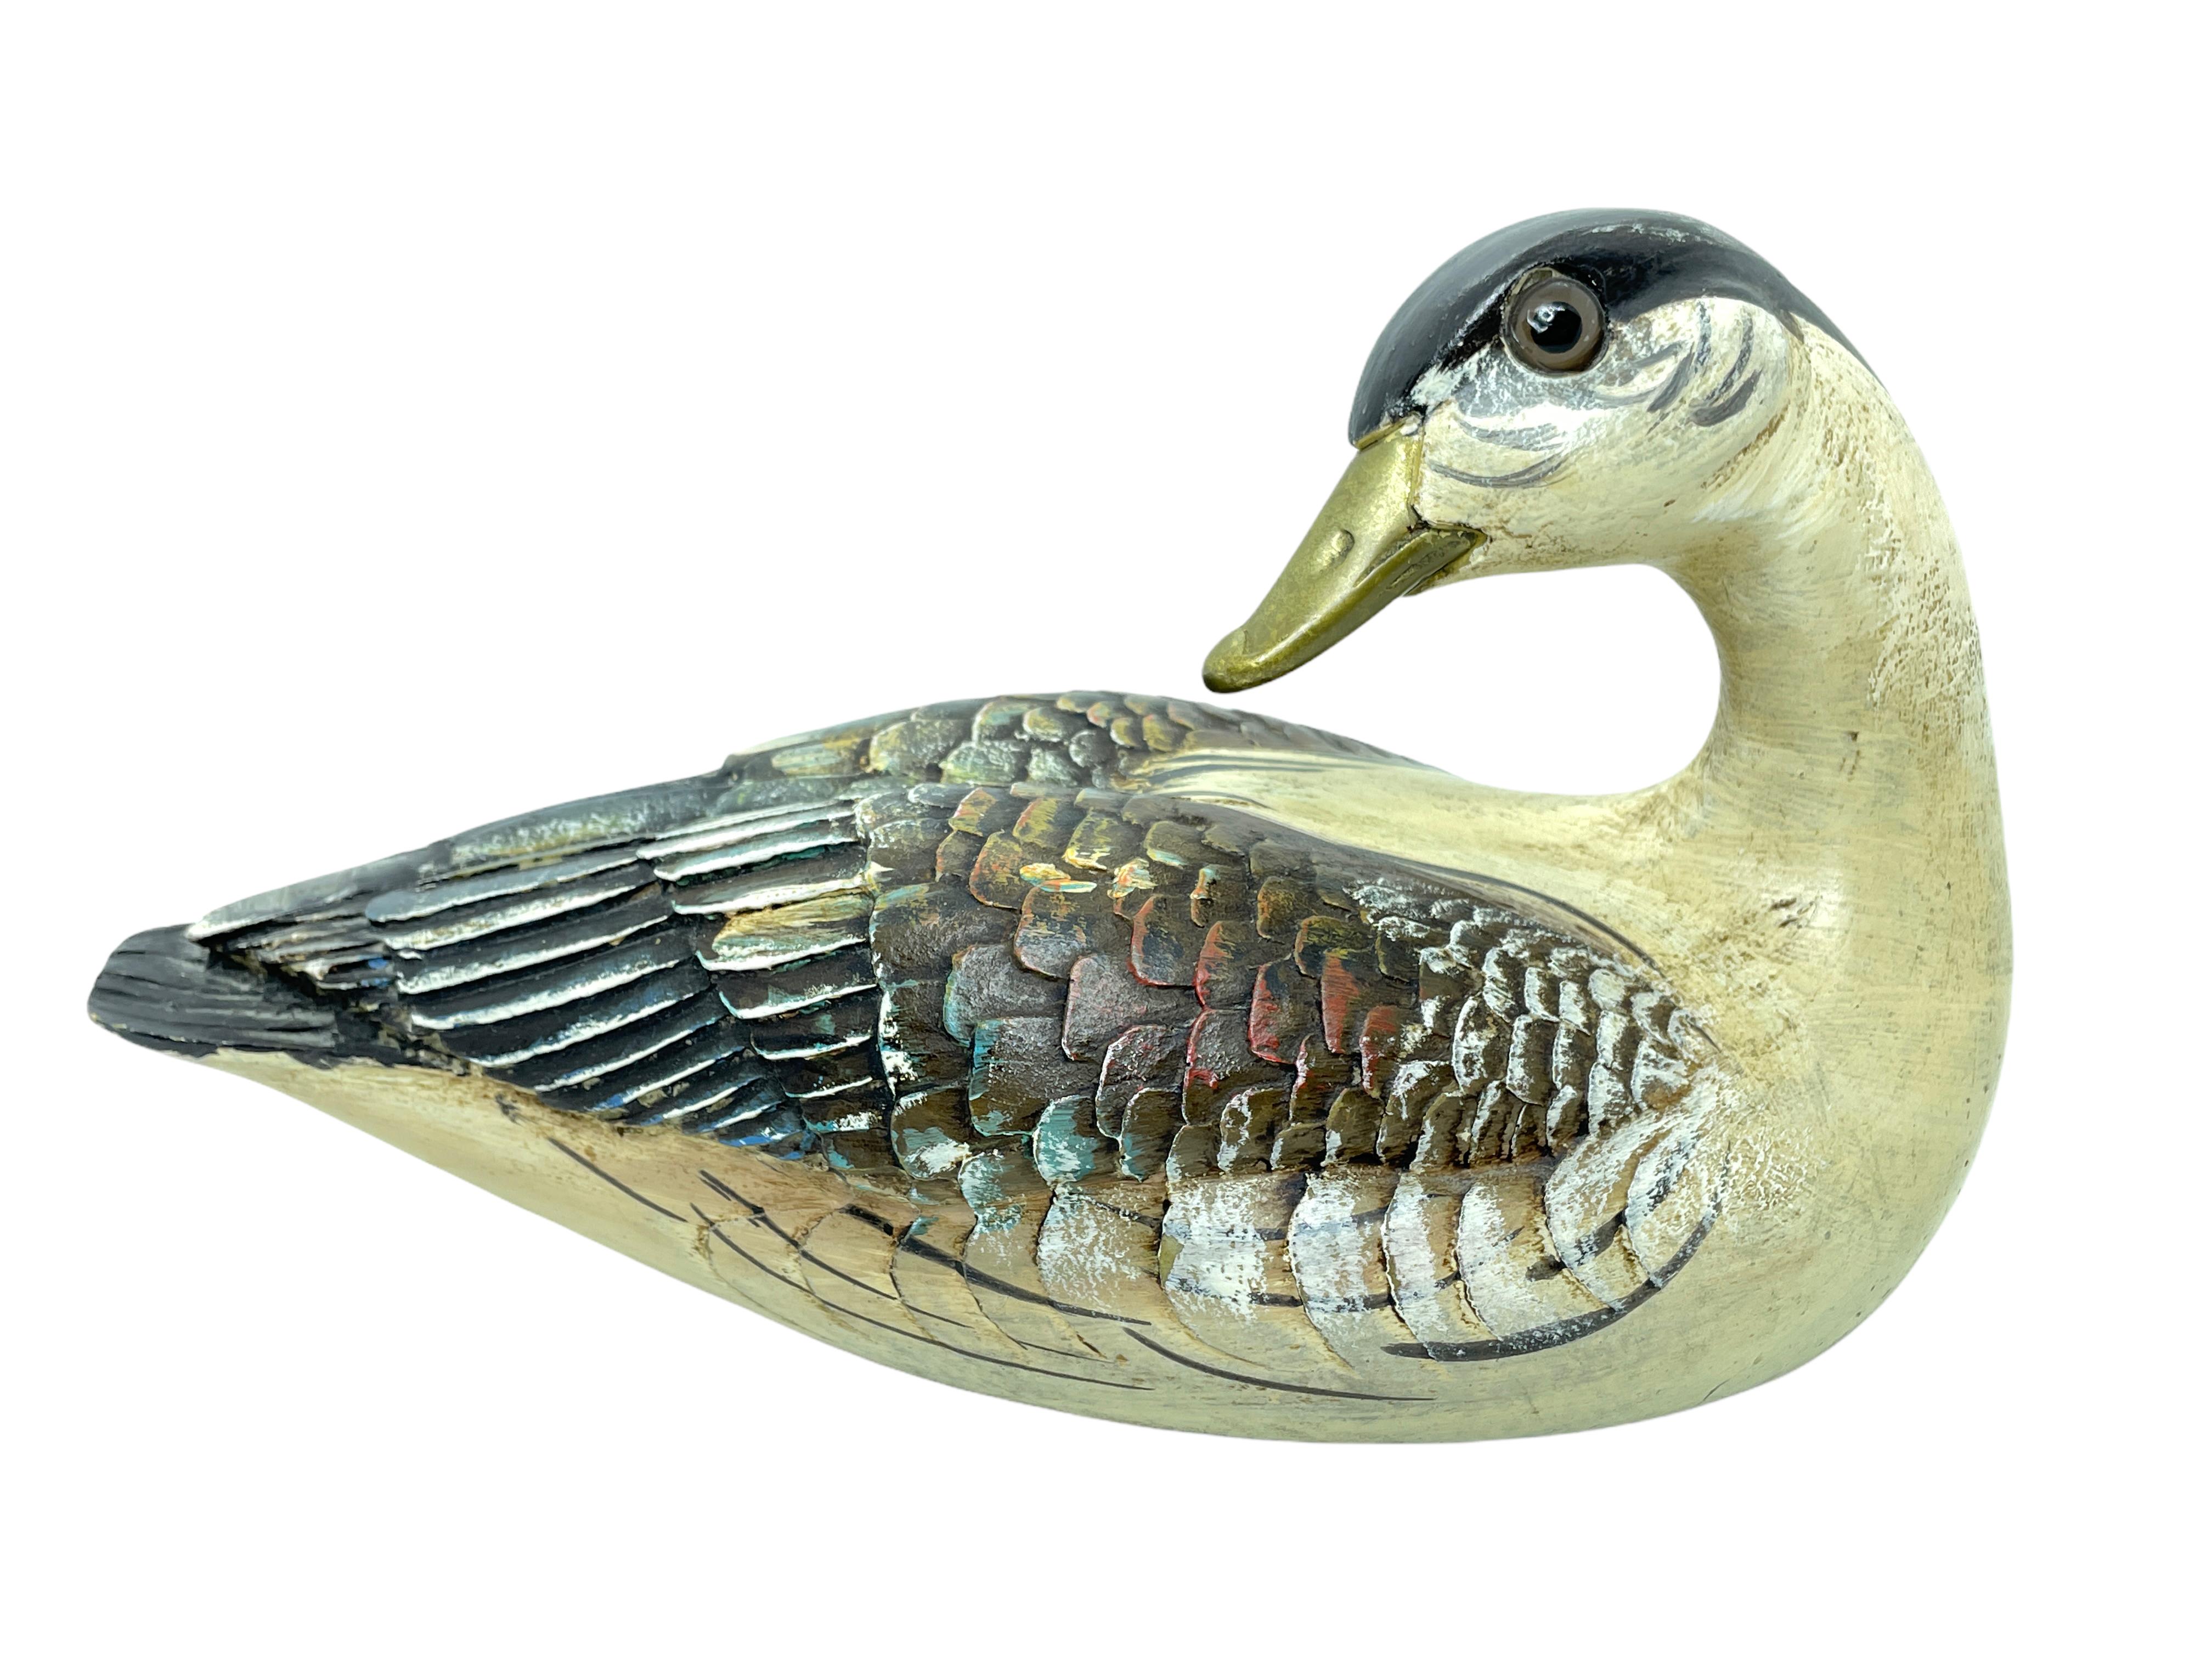 Vintage signed duck figurine by Malevolti, Italy. It features a decoy type design with brass accented parts. It has glass eyes and a hand painted body. A nice addition to the Hollywood Regency interior. Signed Malevolti Italy.